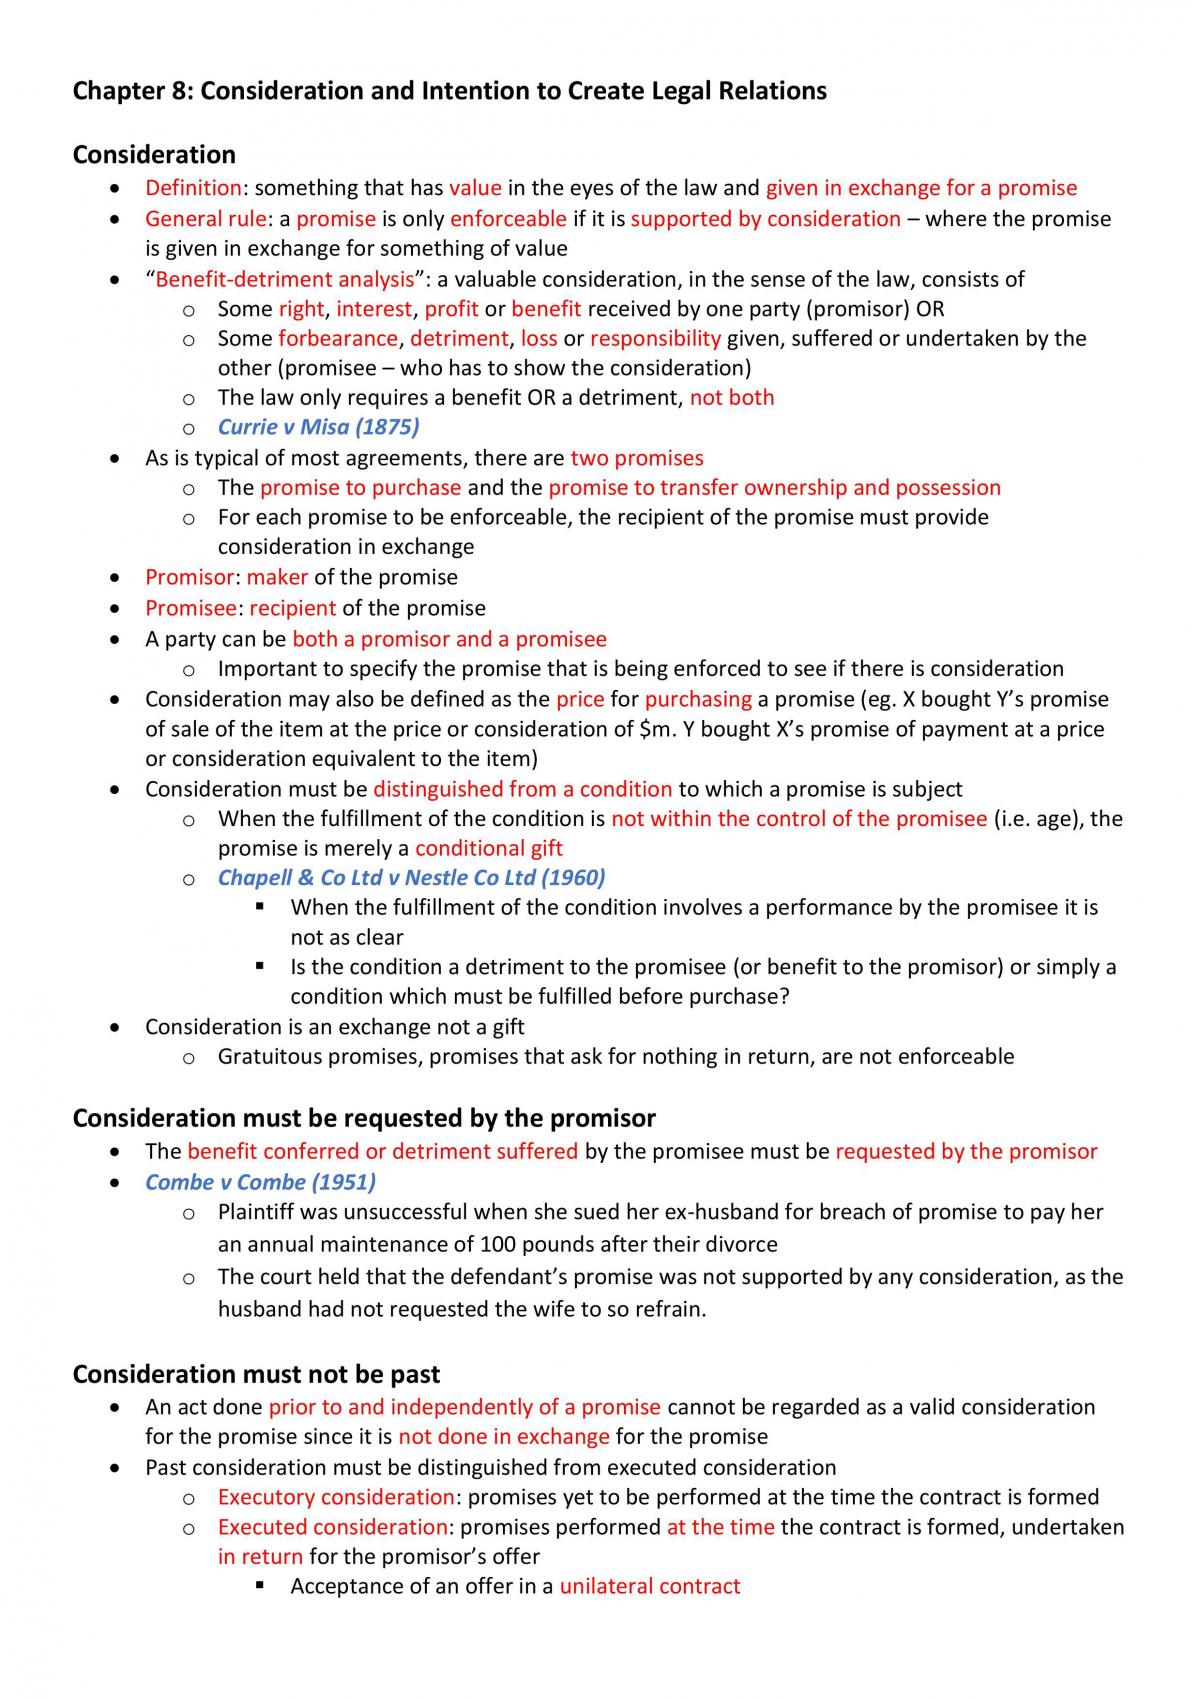 Business Law Consideration and Intention to create legal relations Notes - Page 1